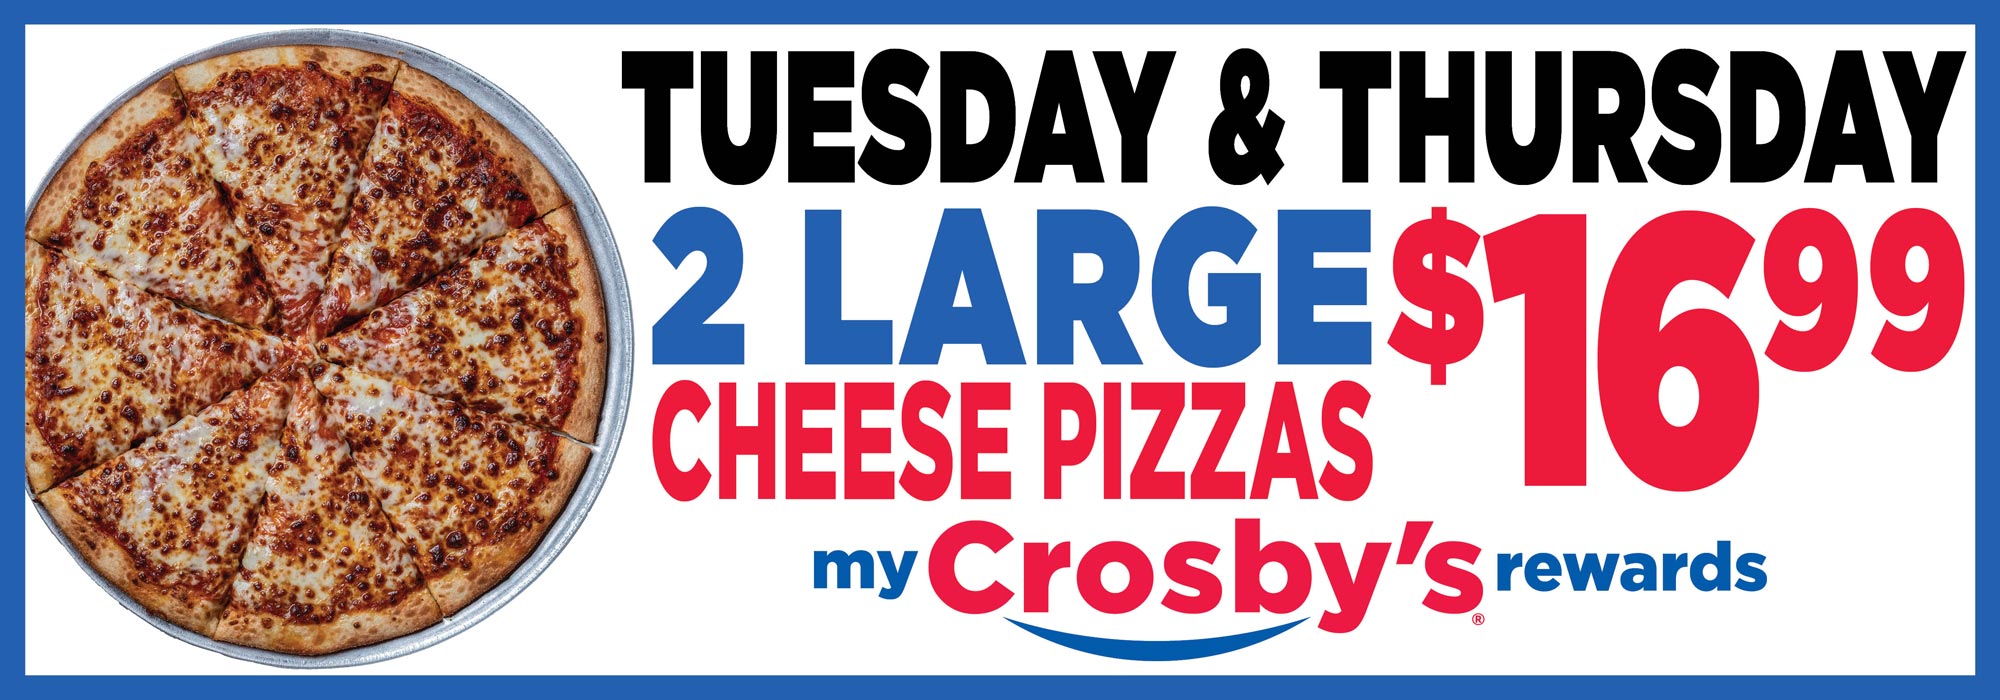 Tuesday & Thursday 2 Large Cheese Pizzas $16.99